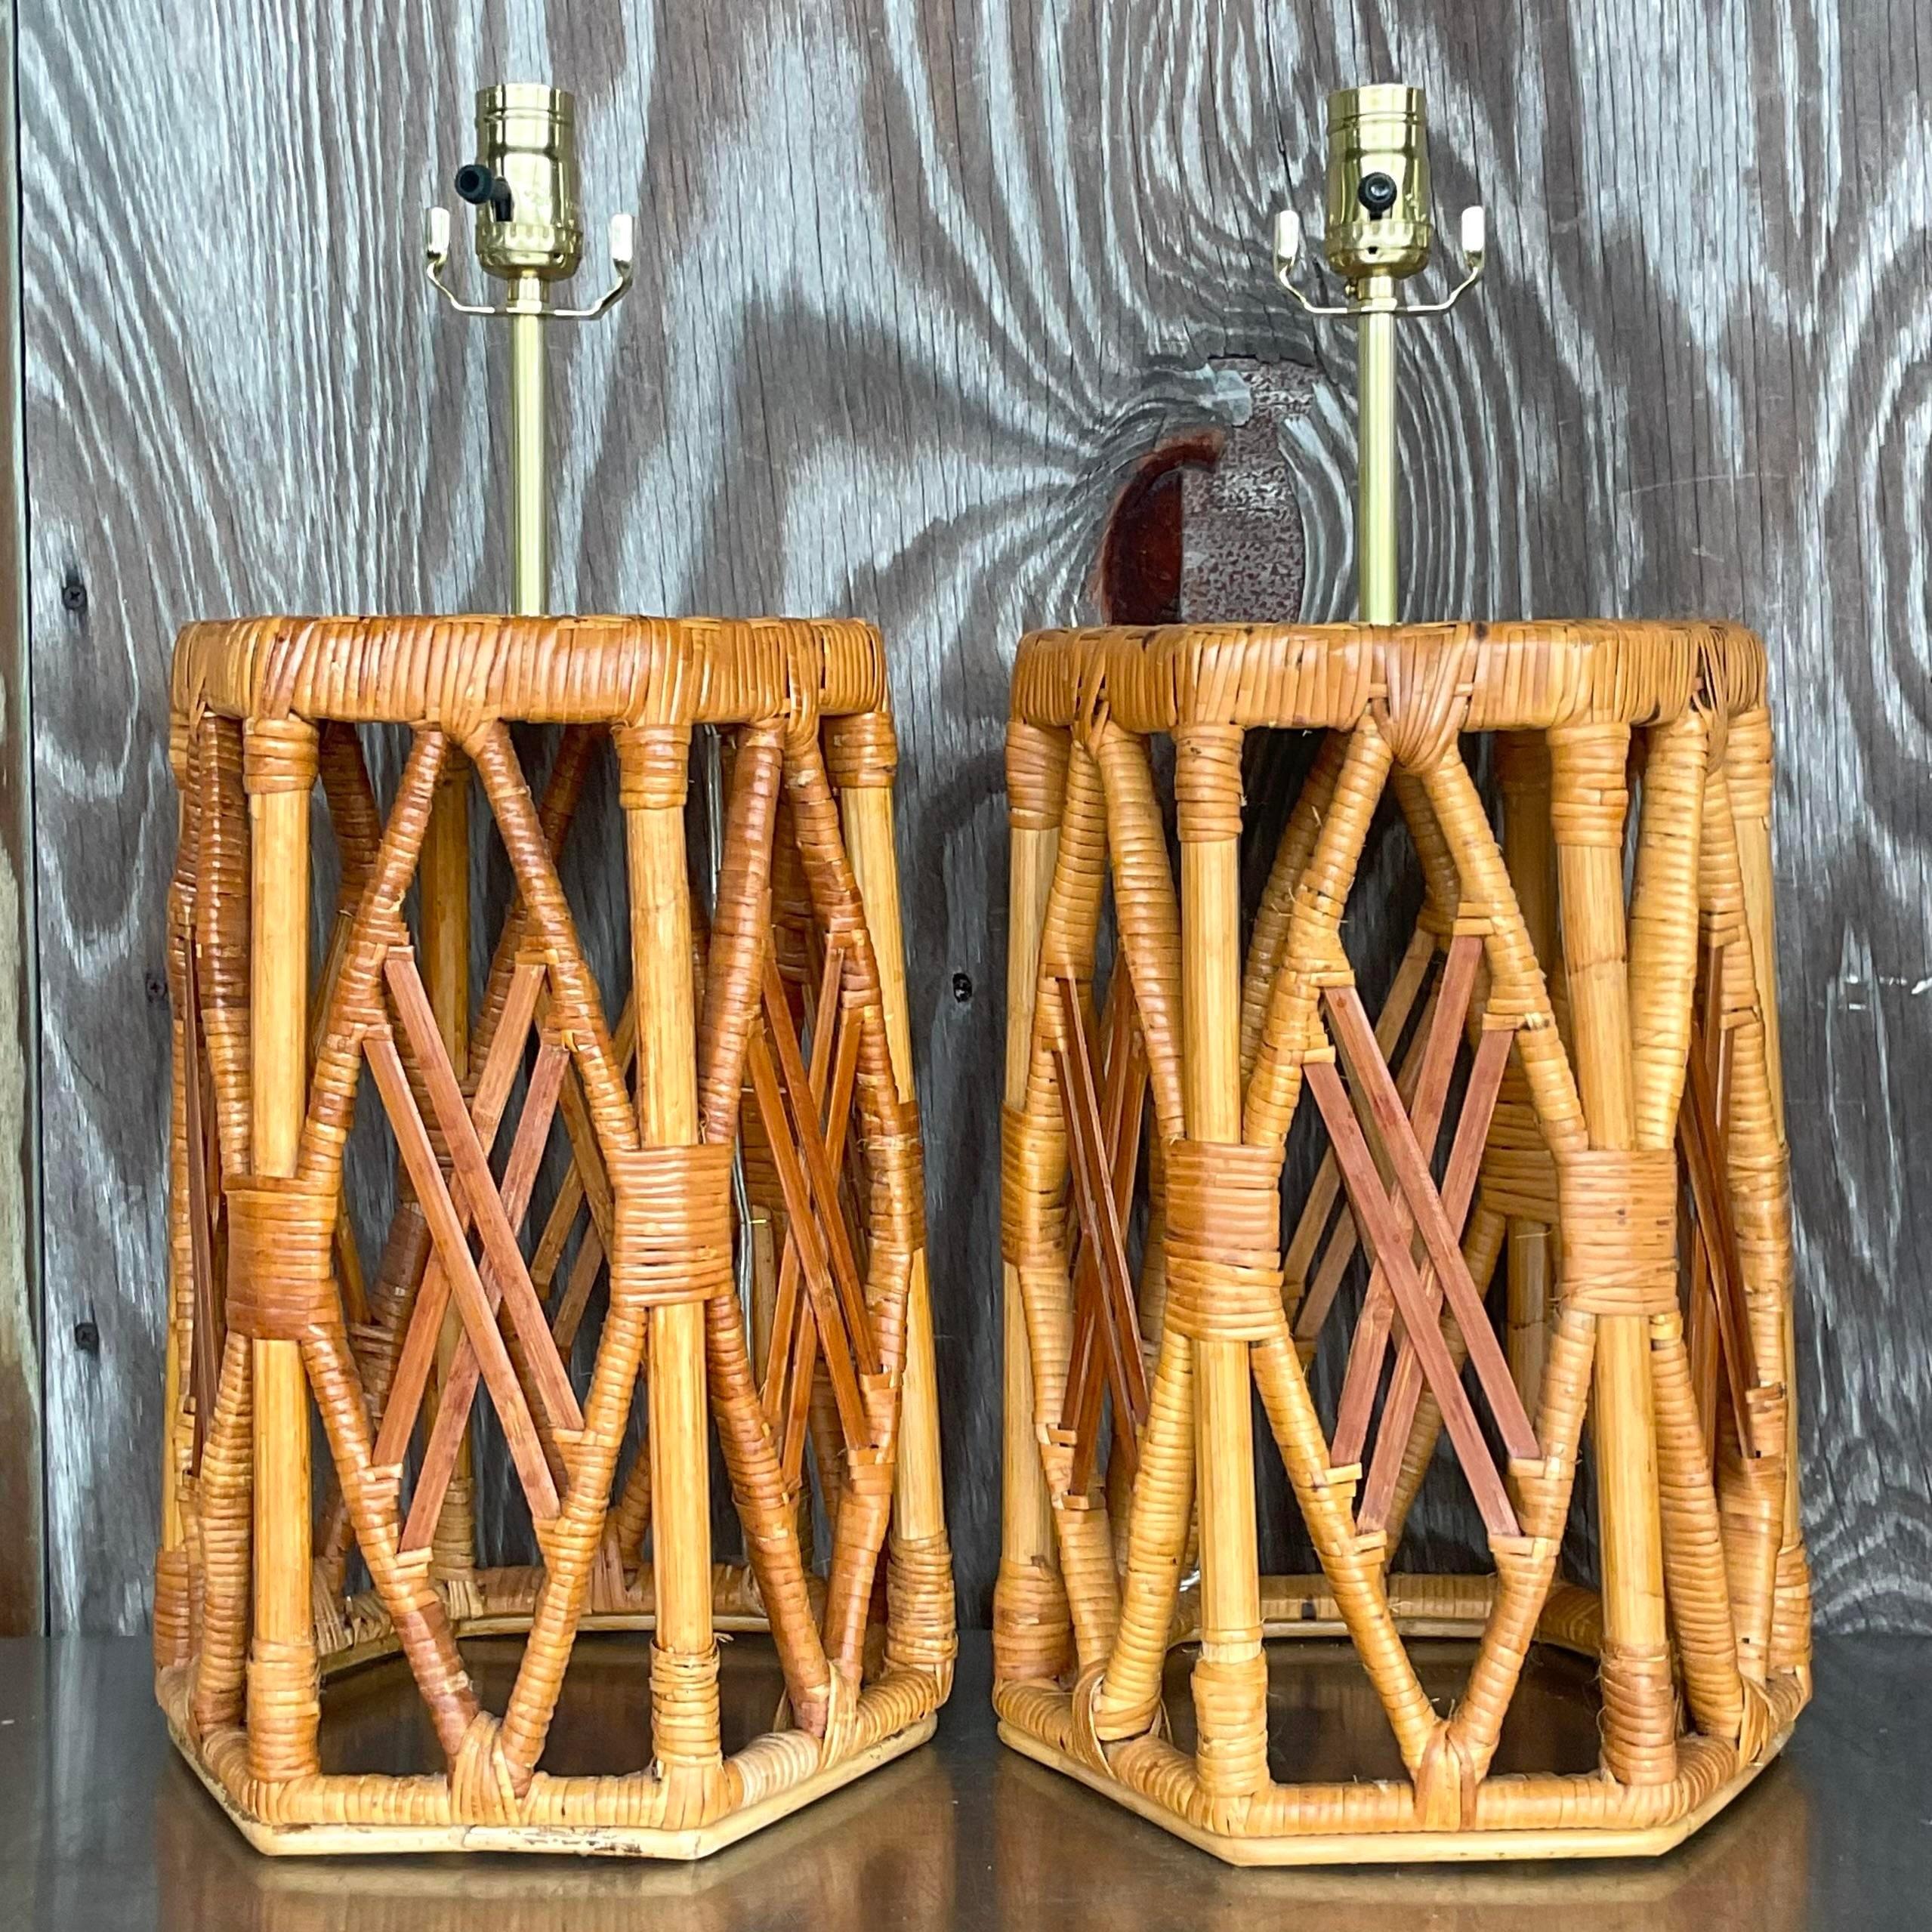 Metal Vintage Coastal Wrapped Rattan Lamps - a Pair For Sale